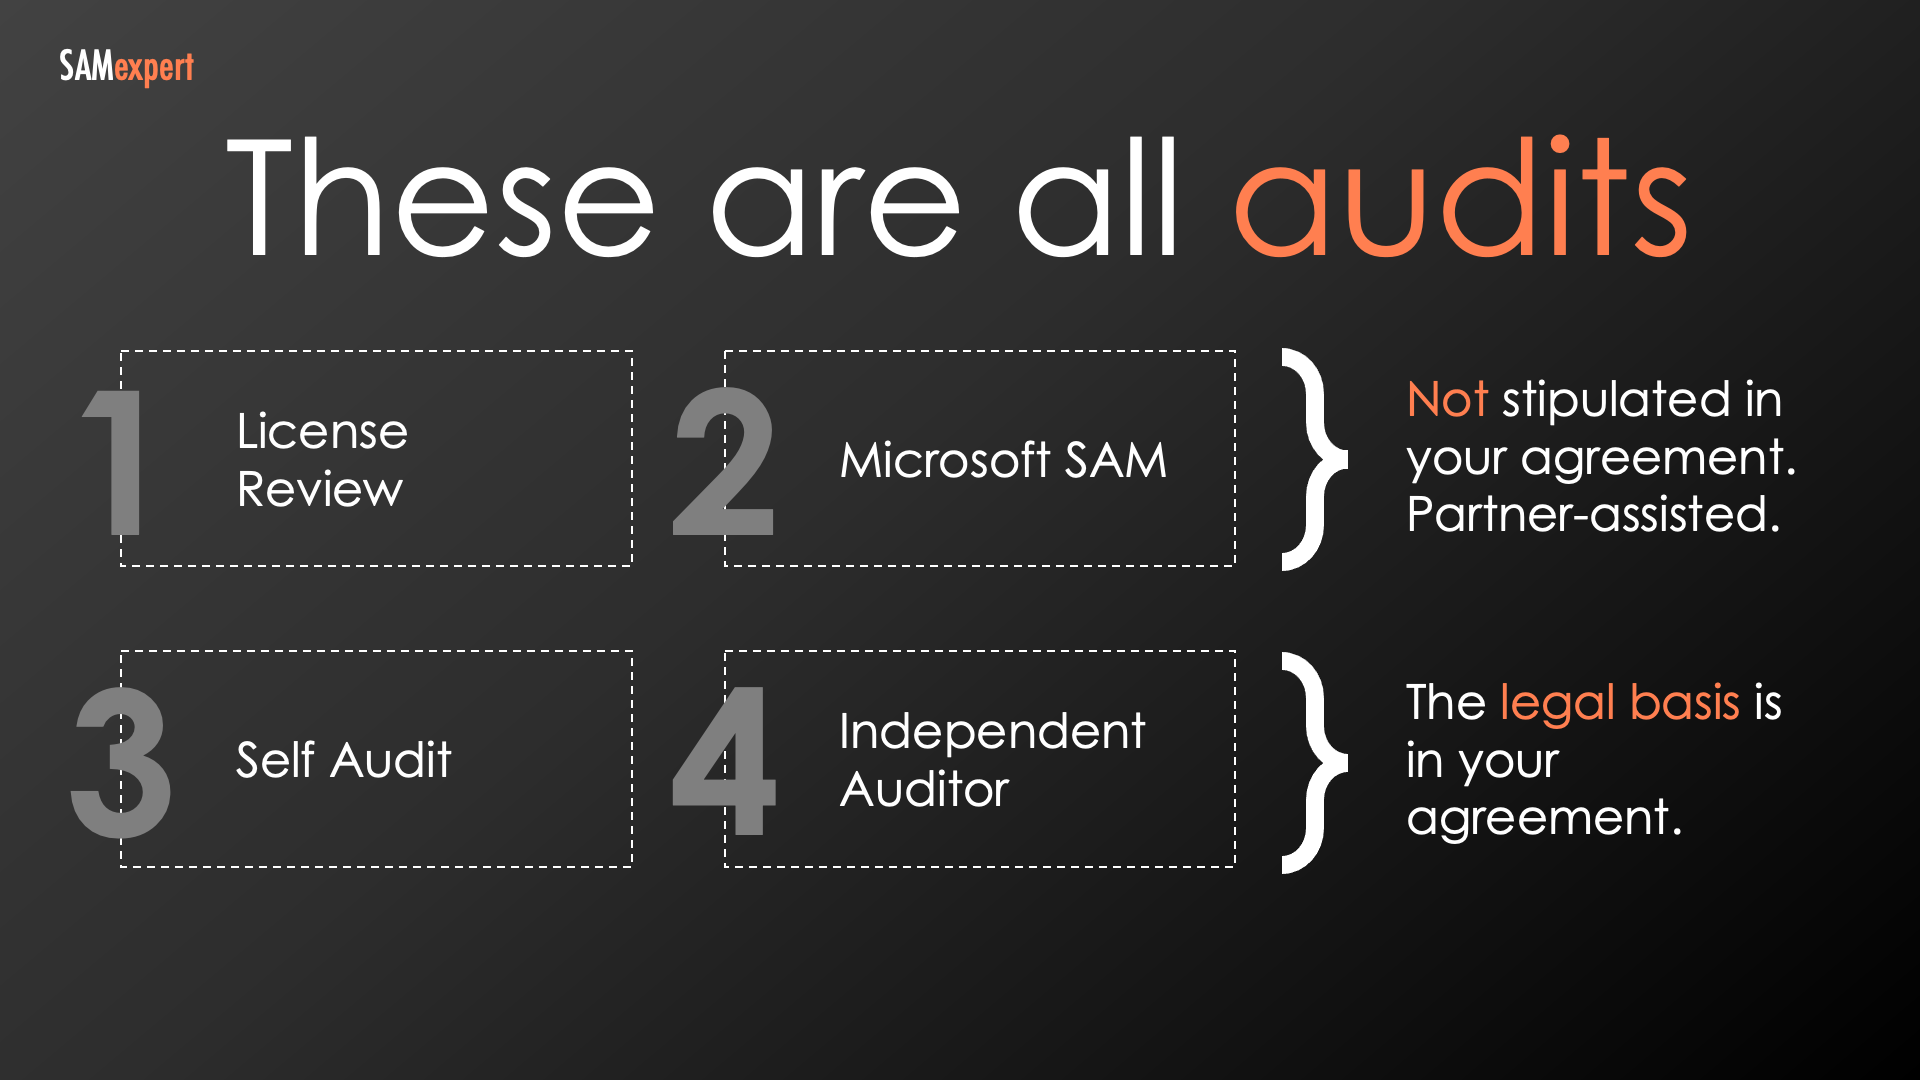 Types of Microsoft audits: License Review, Microsoft SAM, Self Audit, Independent Auditor